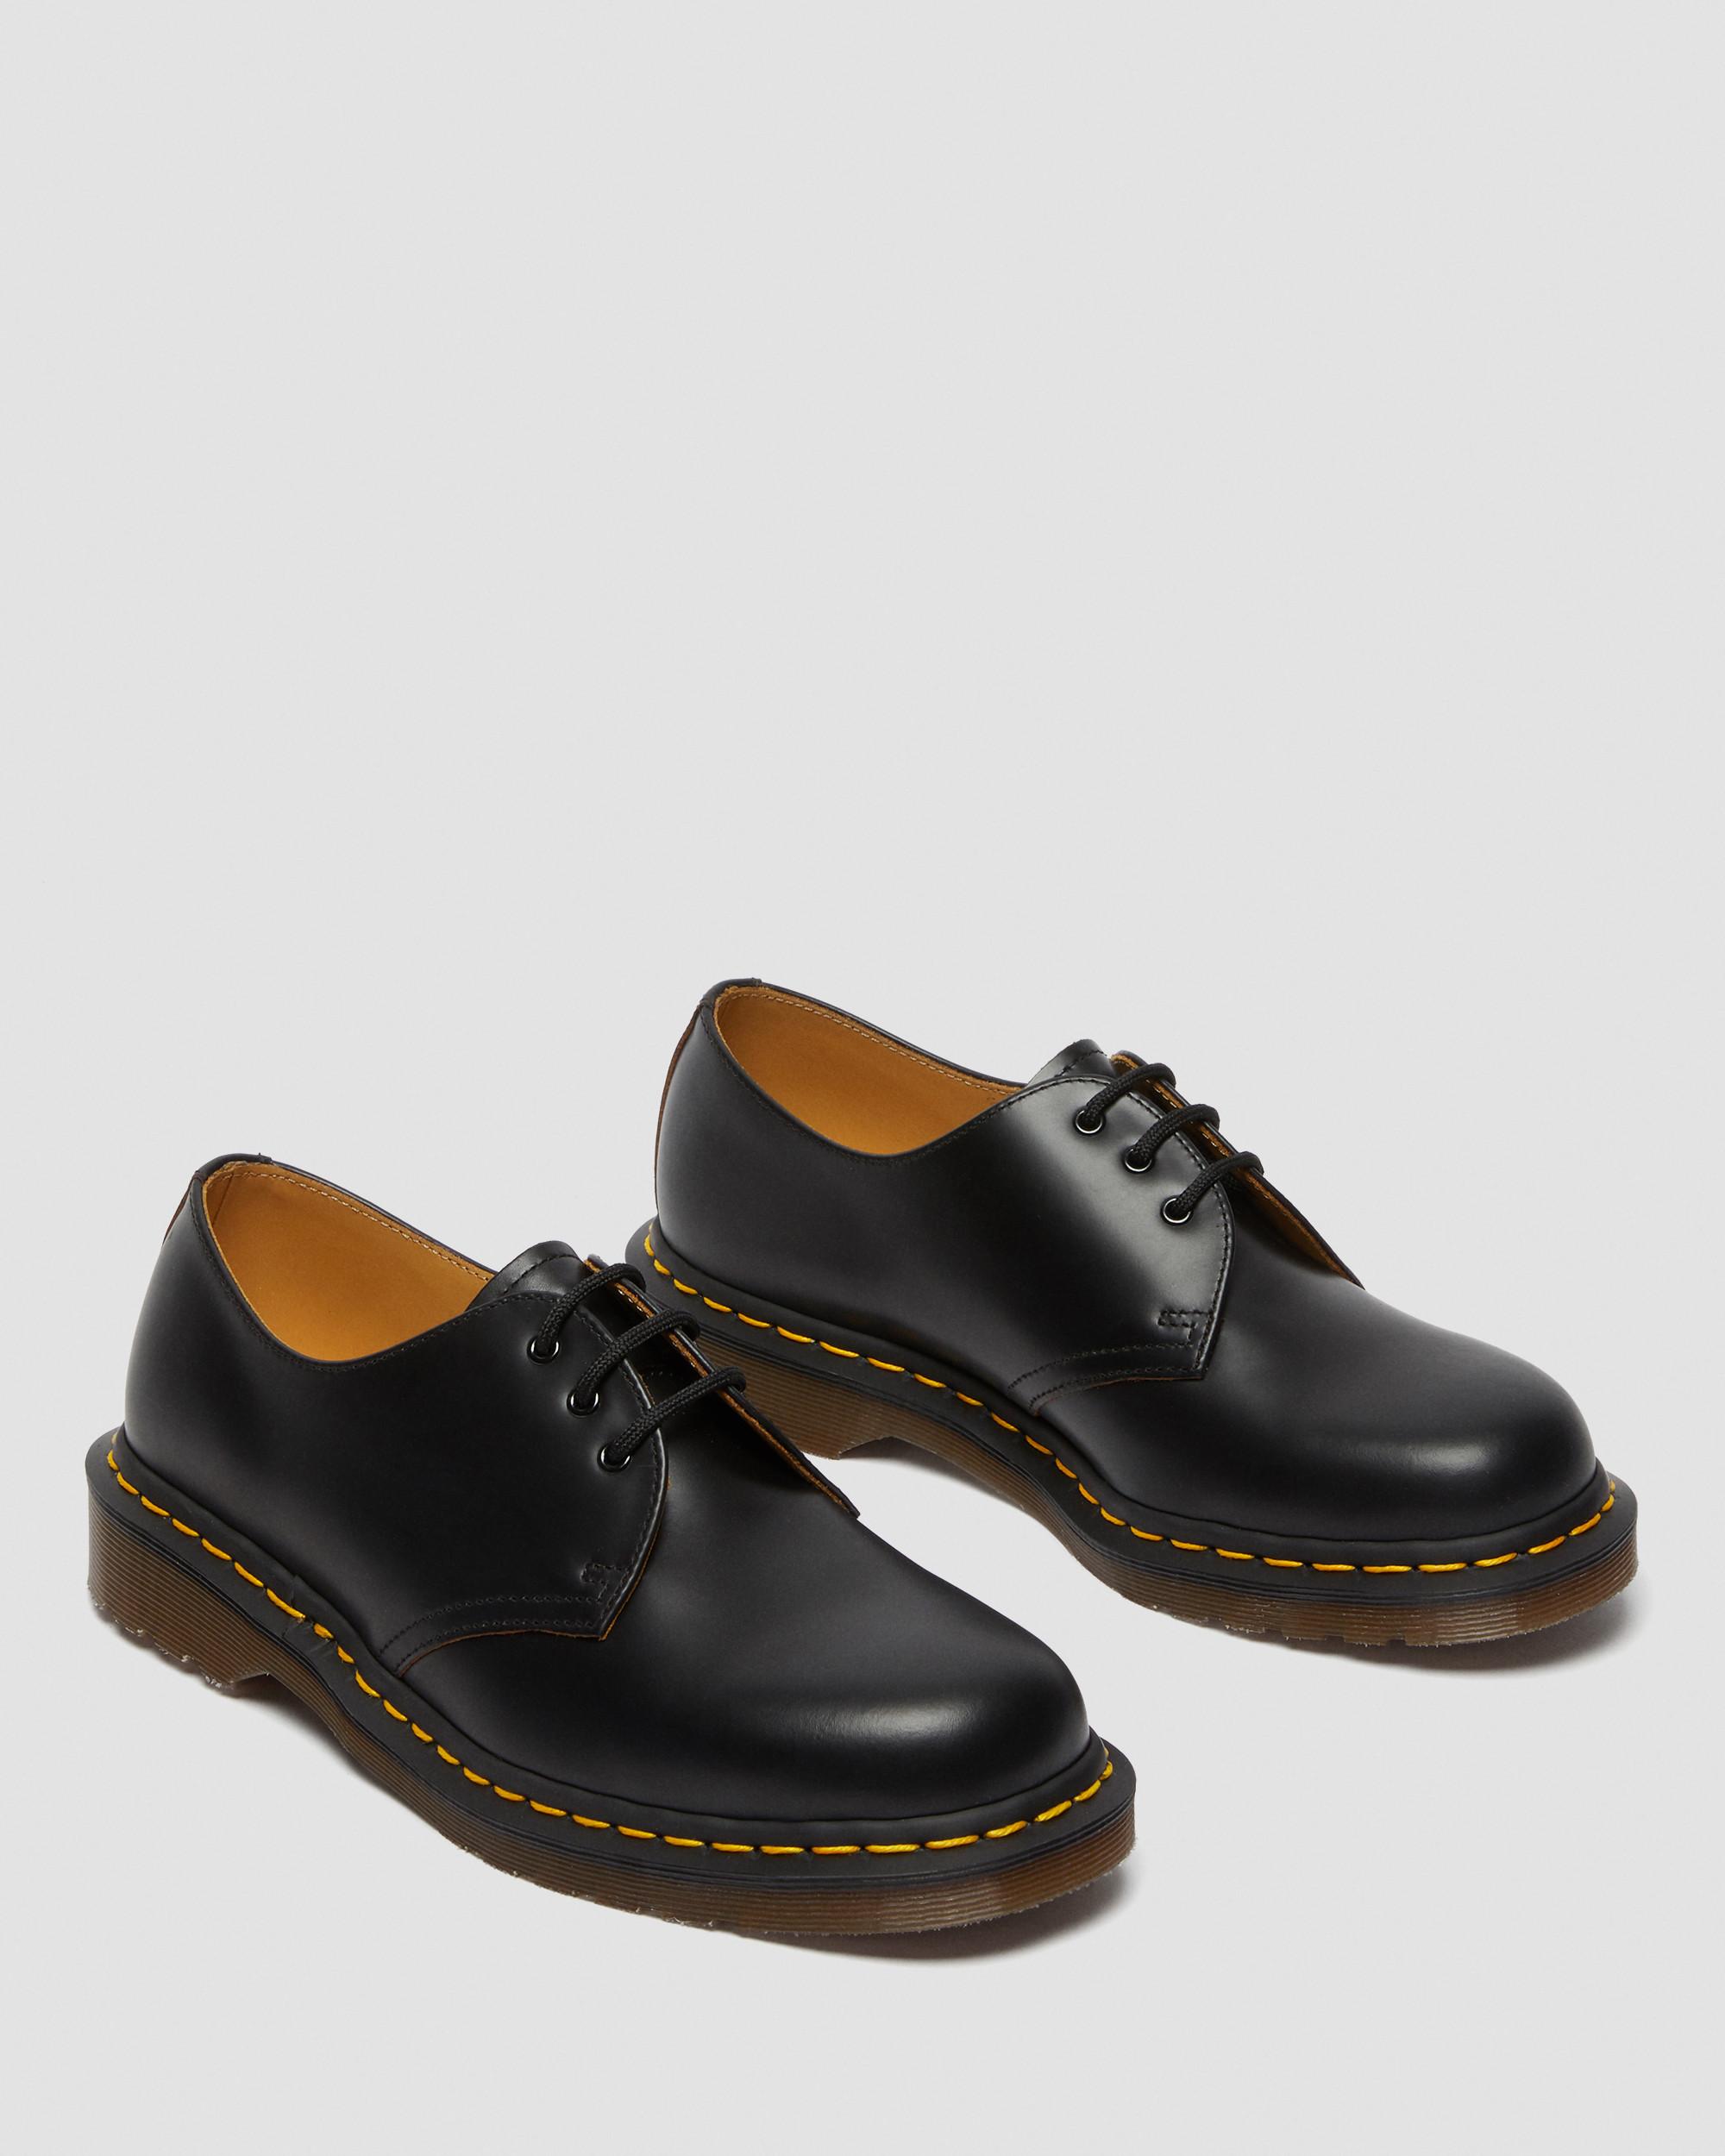 1461 Vintage Made in England Oxford Shoes | Dr. Martens